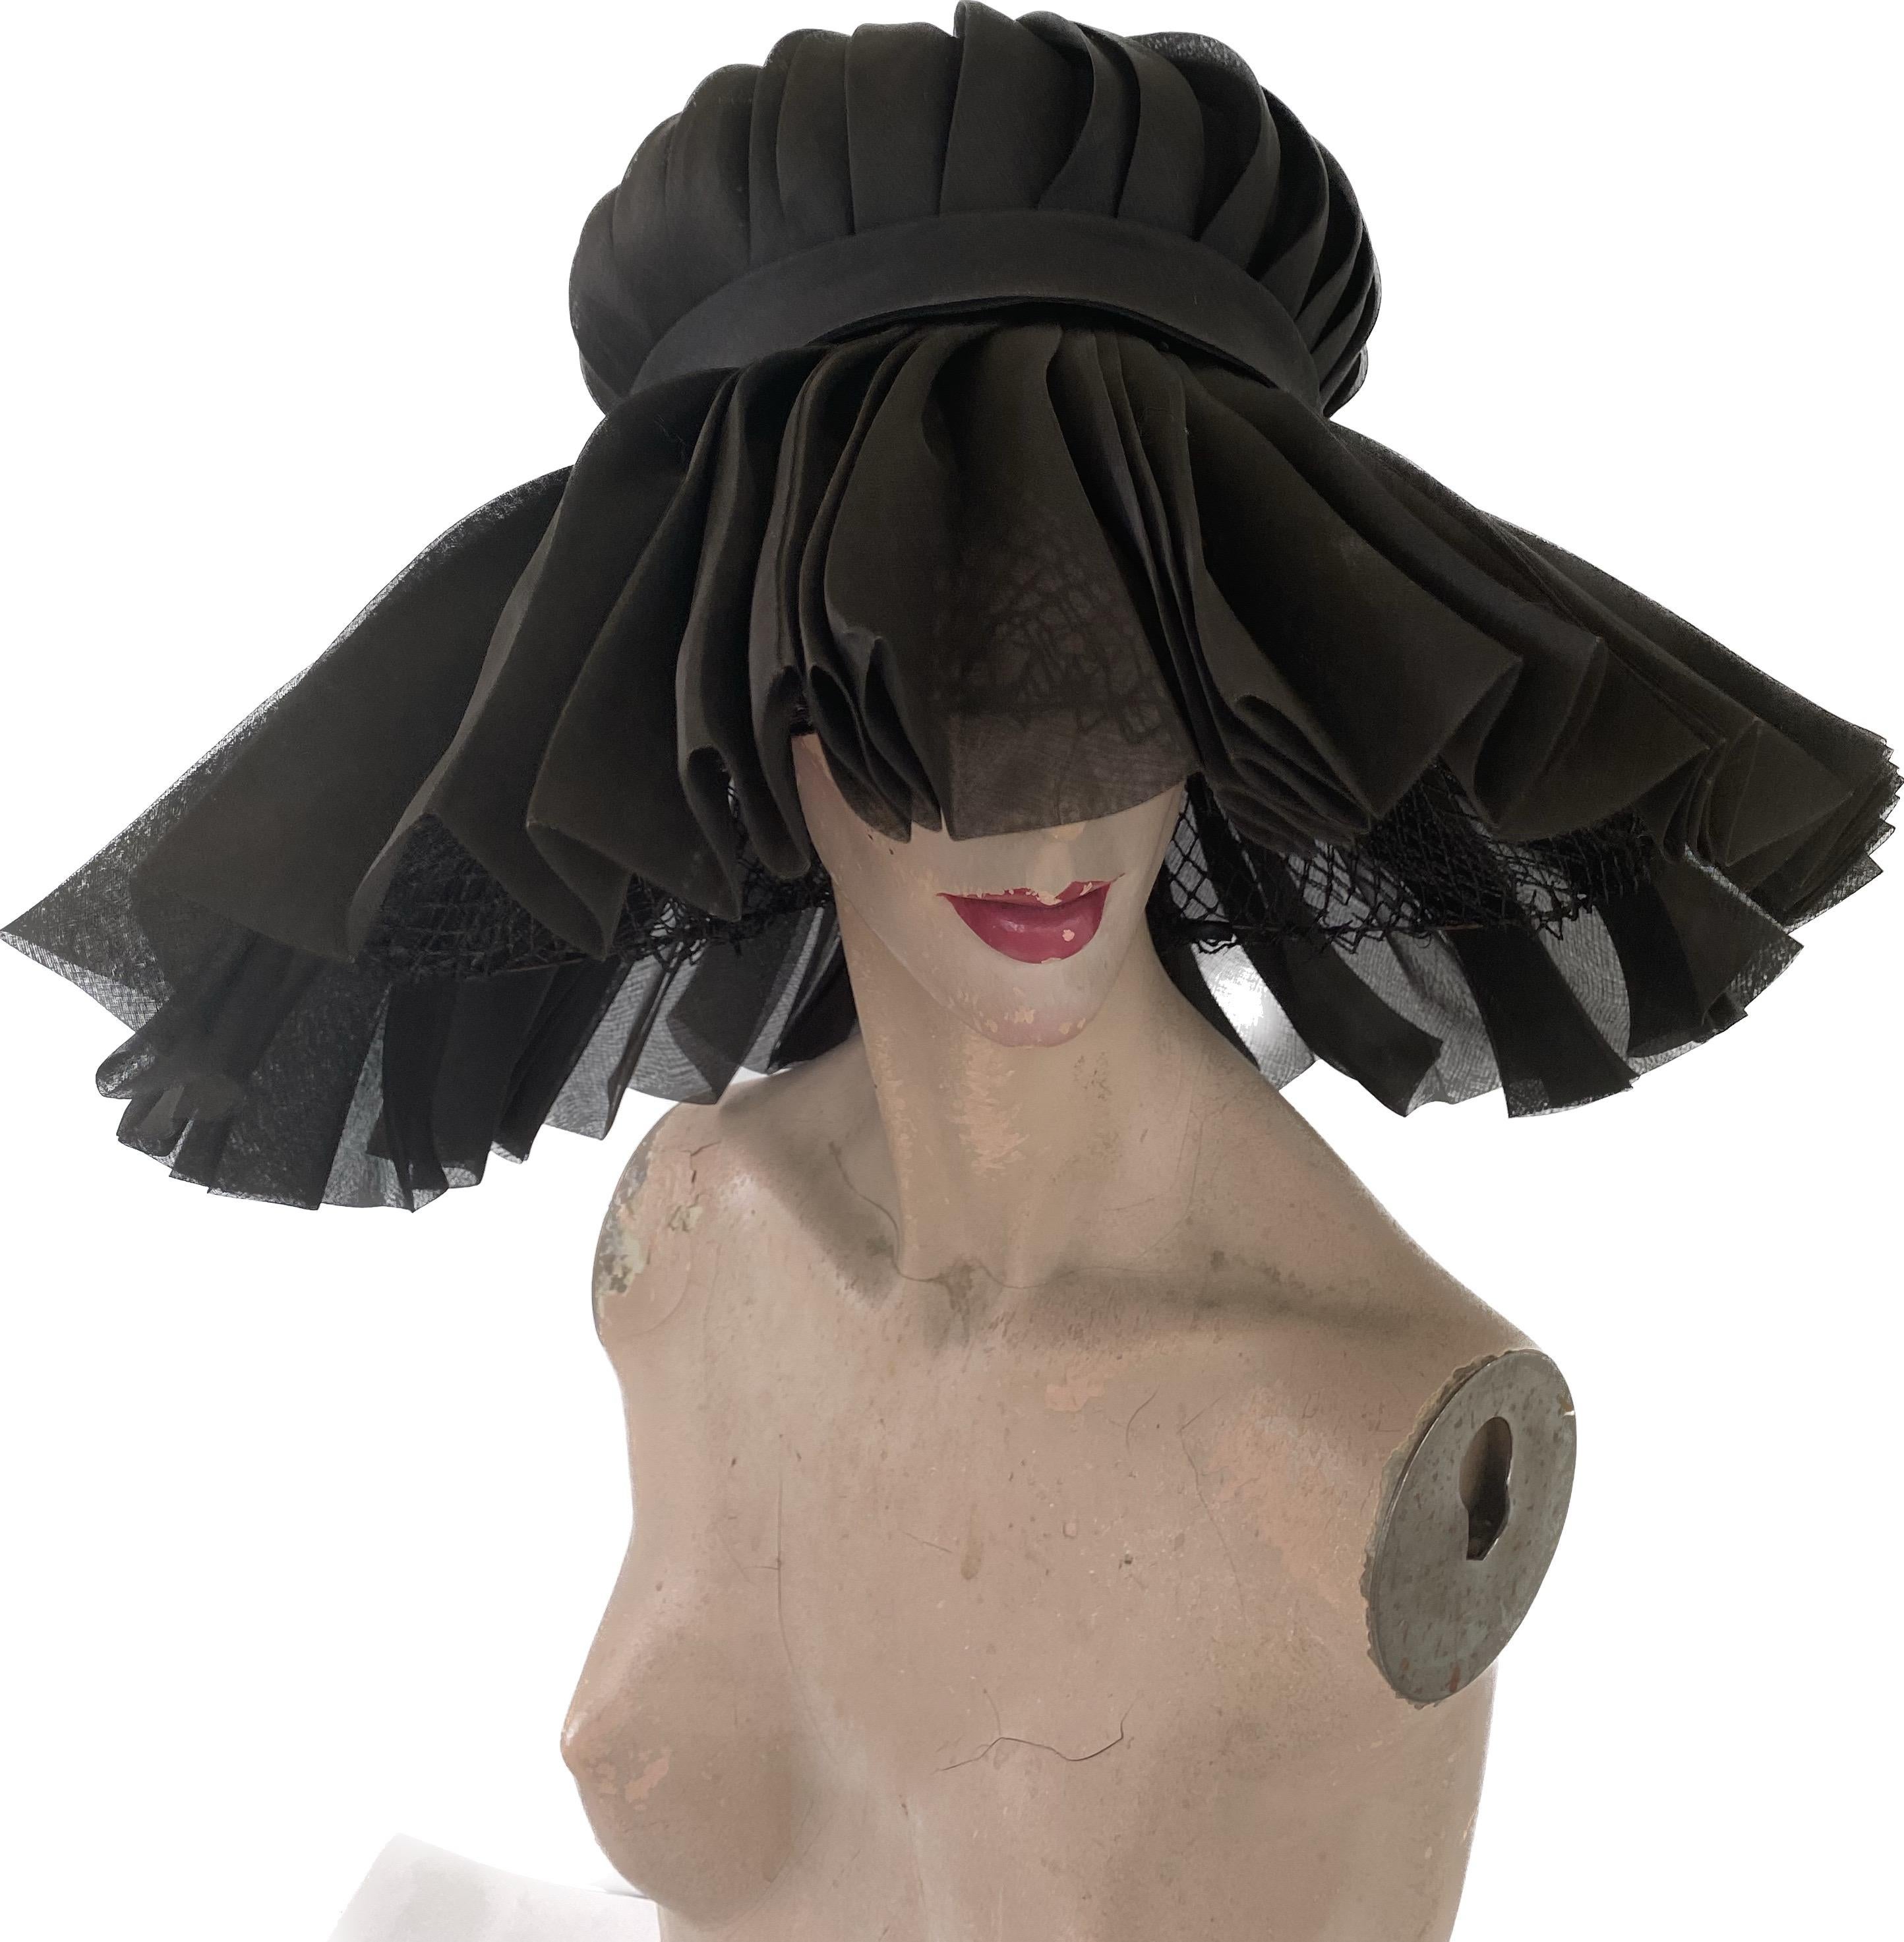 Rare and wonderful silk hat designed by Halston of Bergdorf Goodman 
Halston designed for Bergdorf Goodman in the 1960s 
This is a majestic piece , one of his earliest hats .
It is made of pleated silk with a swirled silk crown and a silk band and